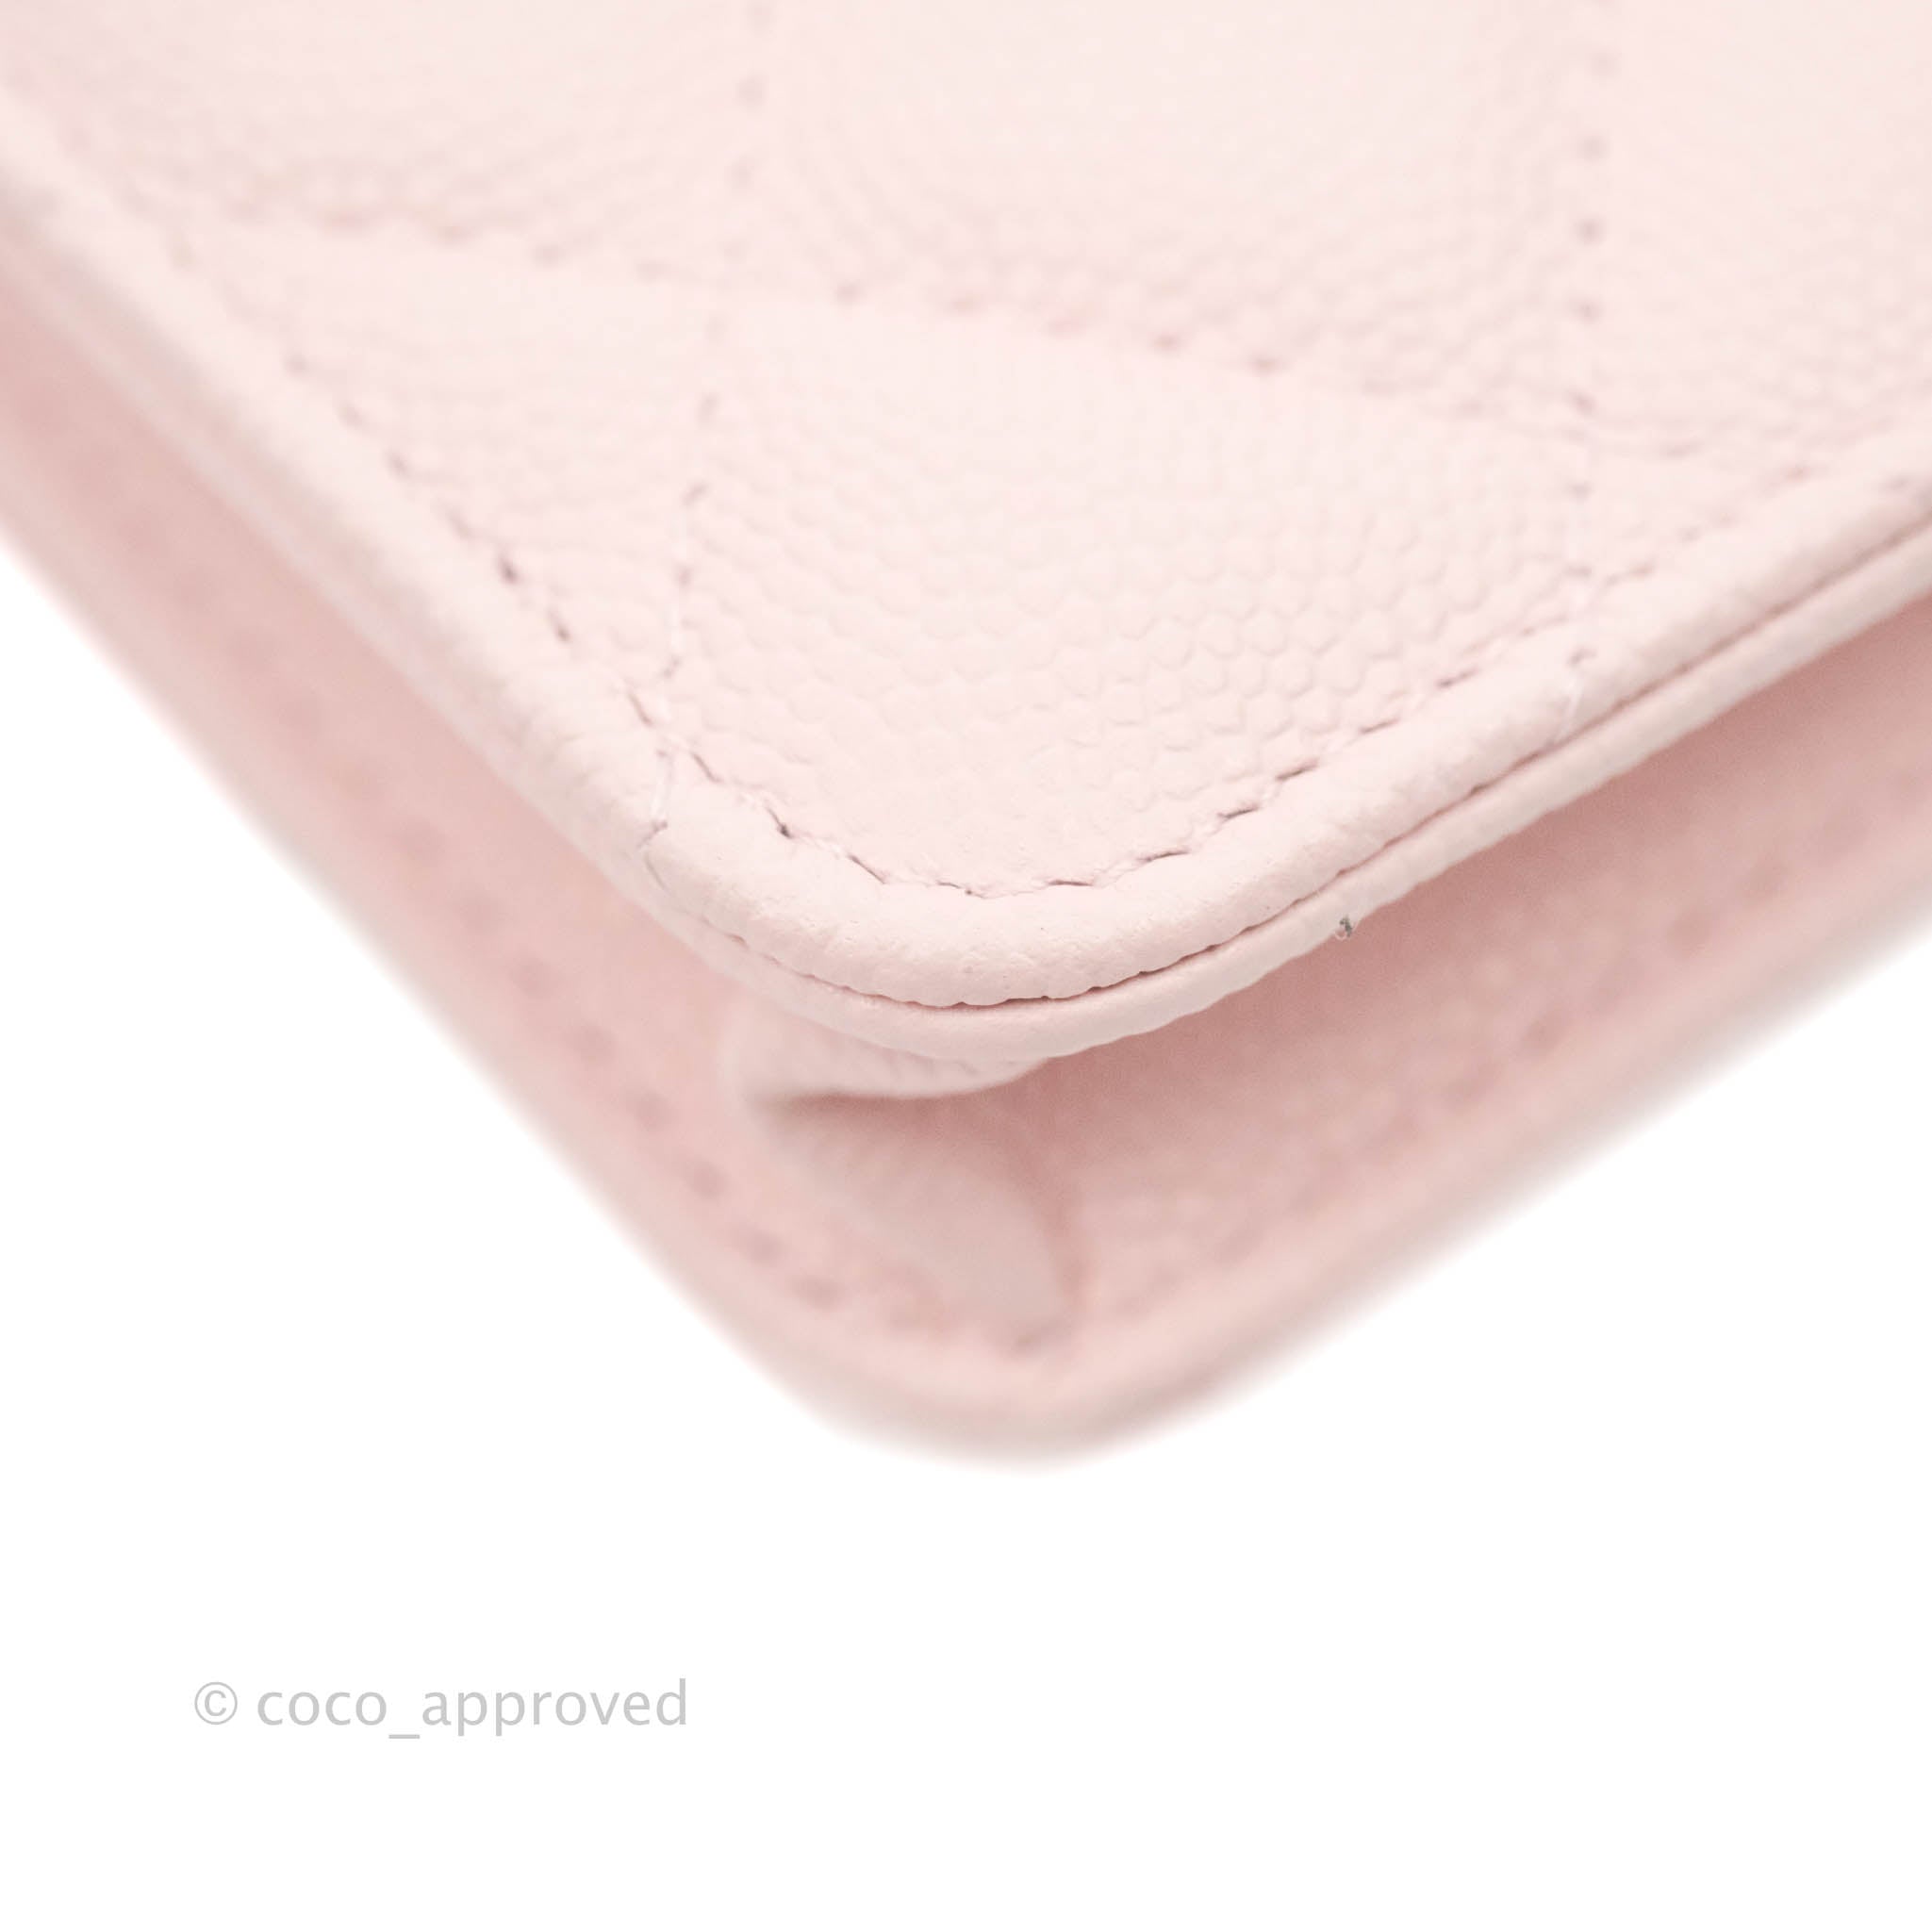 CHANEL Quilted Caviar Leather Top Zip Card Holder Light Pink